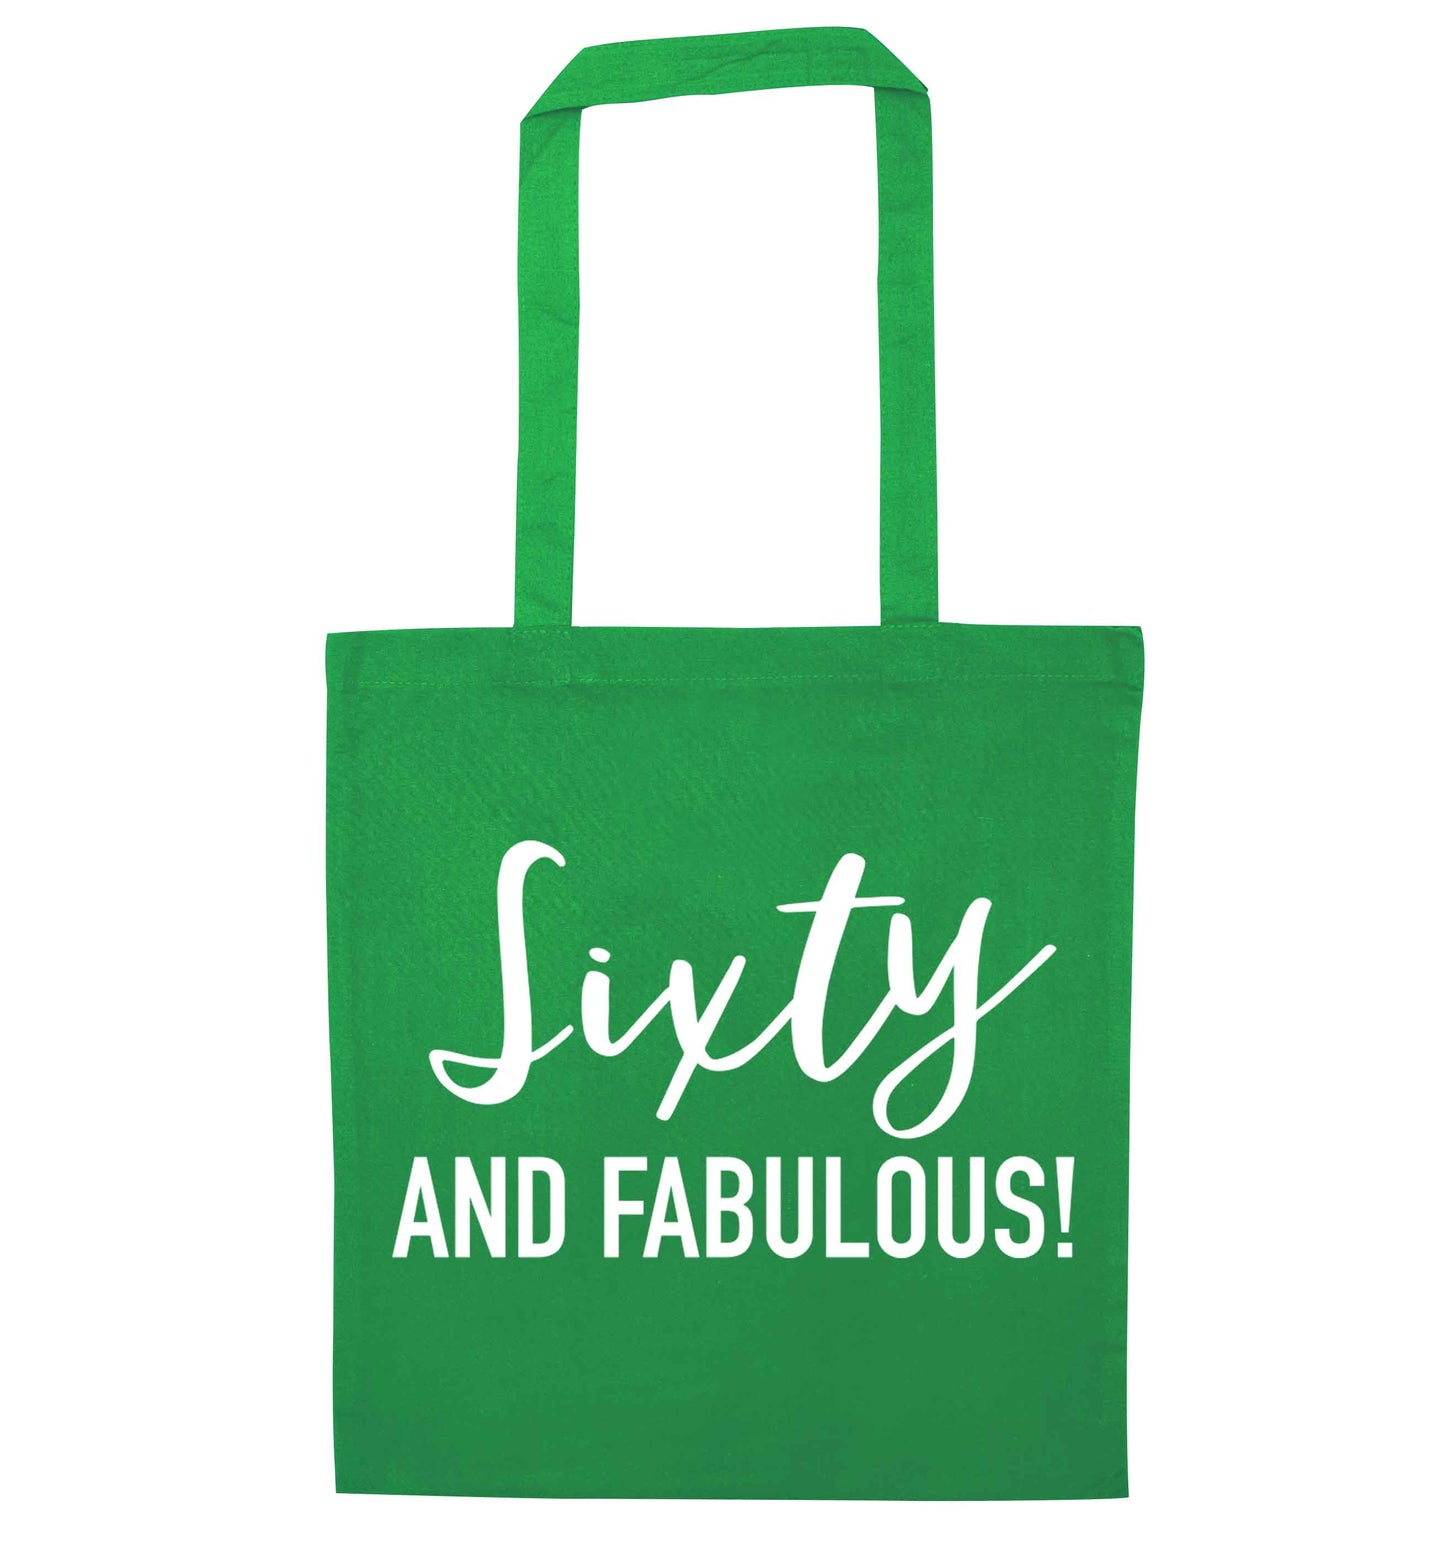 Sixty and fabulous green tote bag